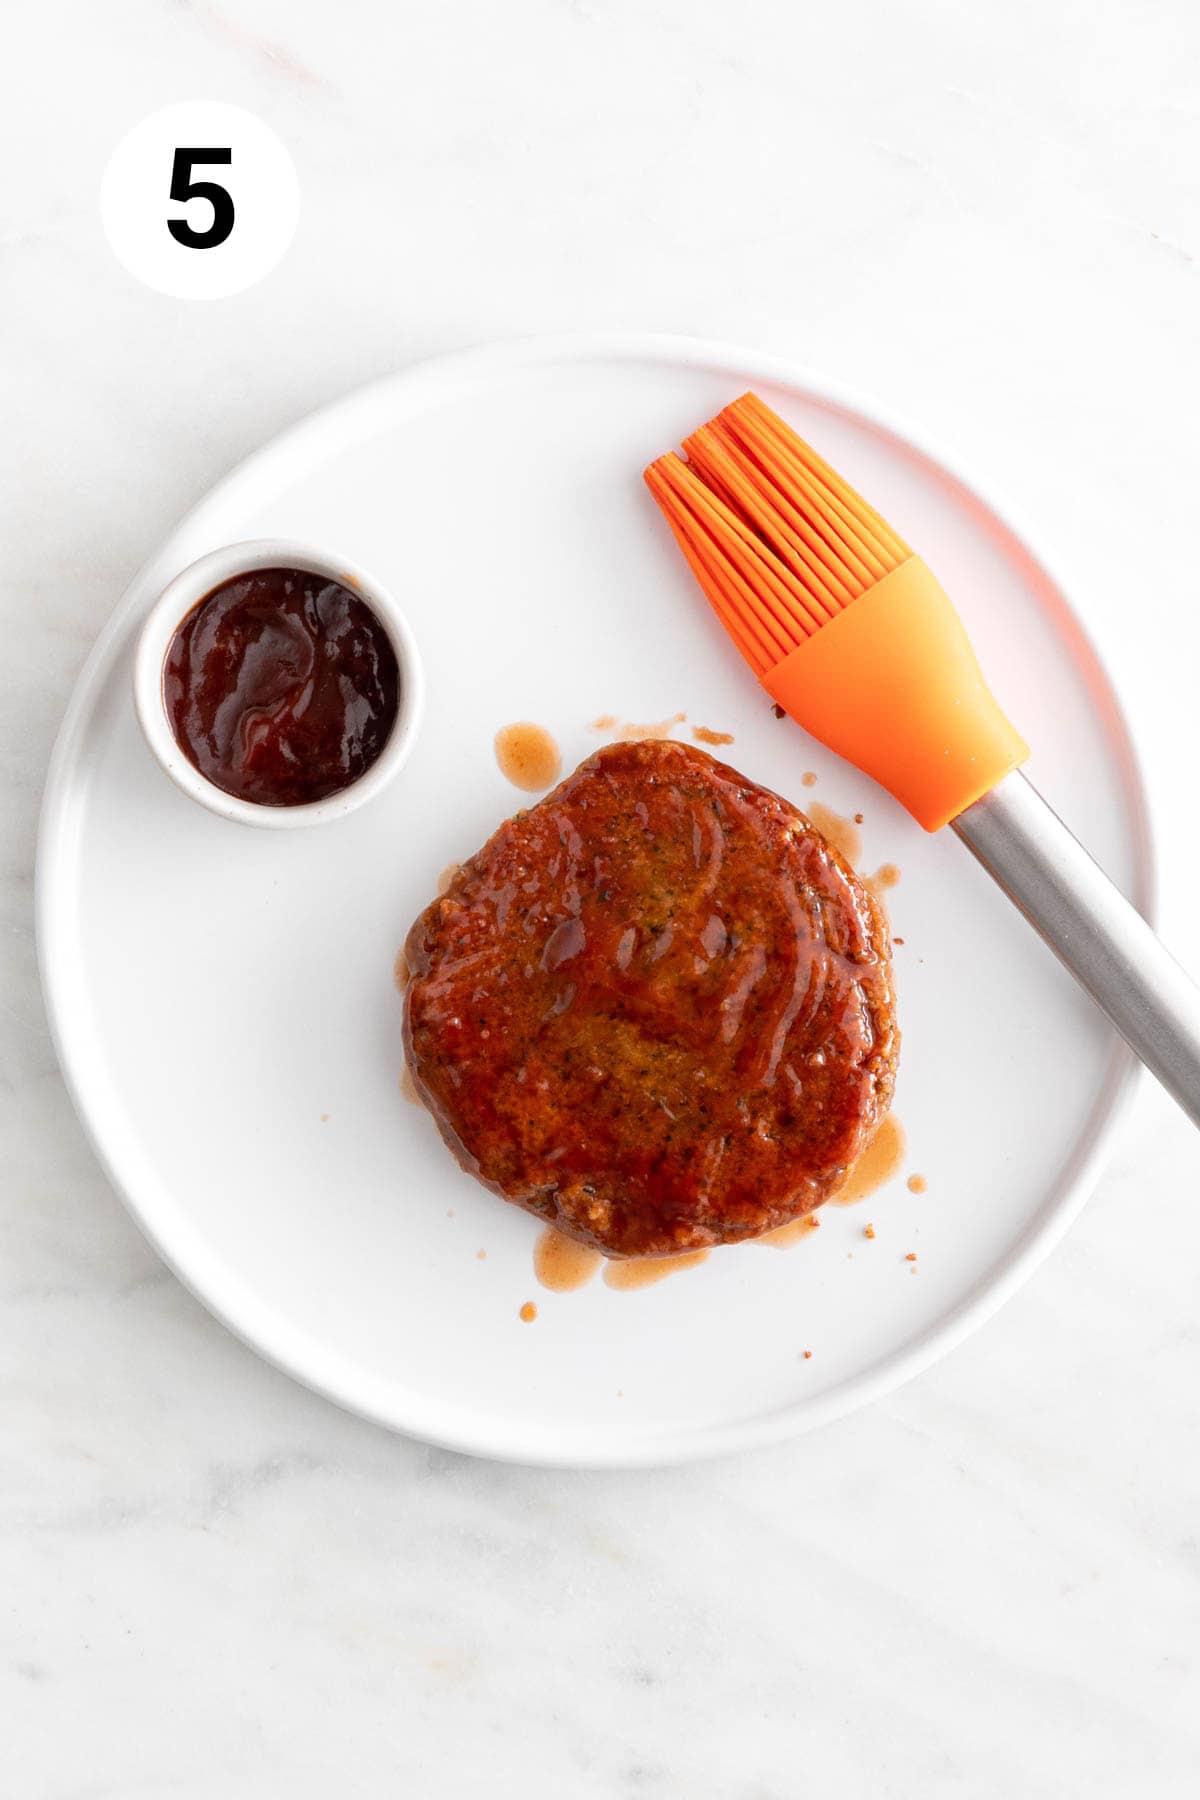 A vegan chickpea burger brushed with BBQ sauce on a white plate.